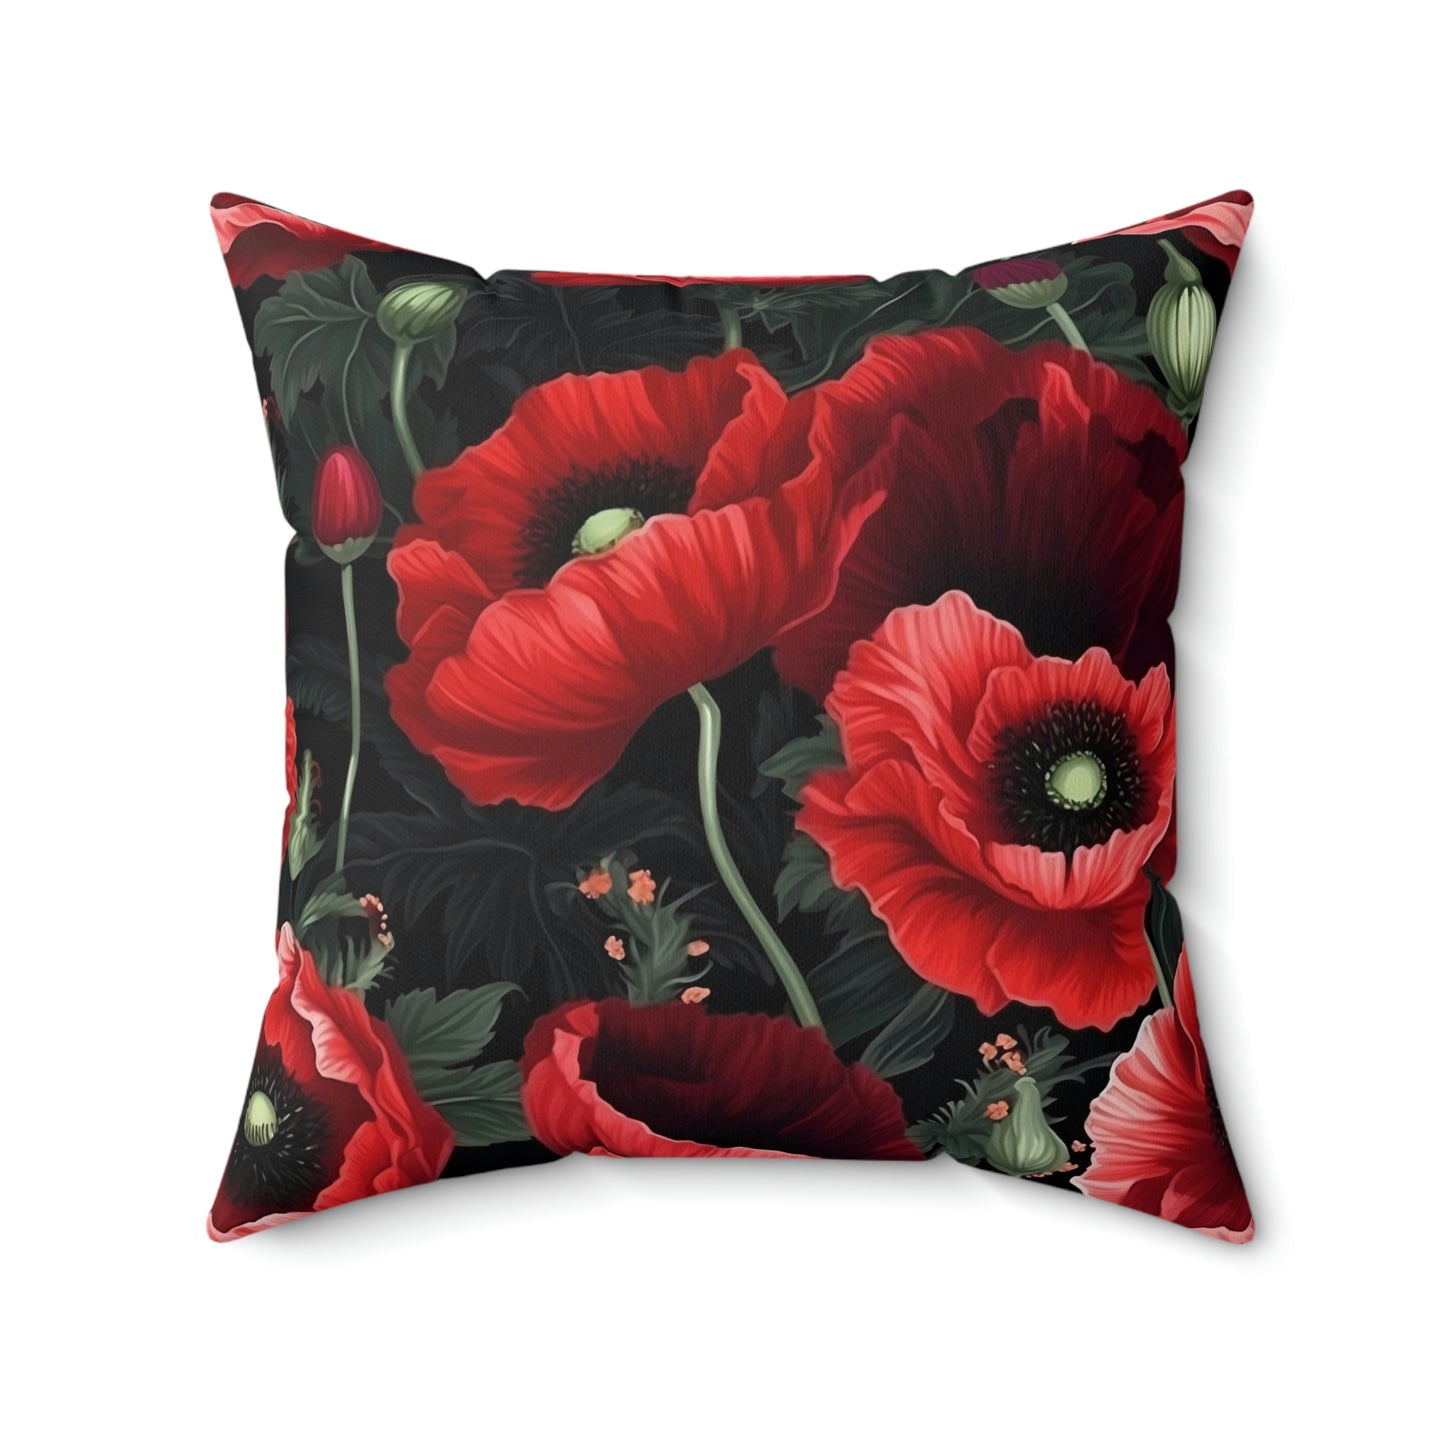 Poppy Filled Pillow with Insert, Red Poppies Floral Flowers Square Throw Accent Decorative Room Decor Floor Sofa Couch Cushion